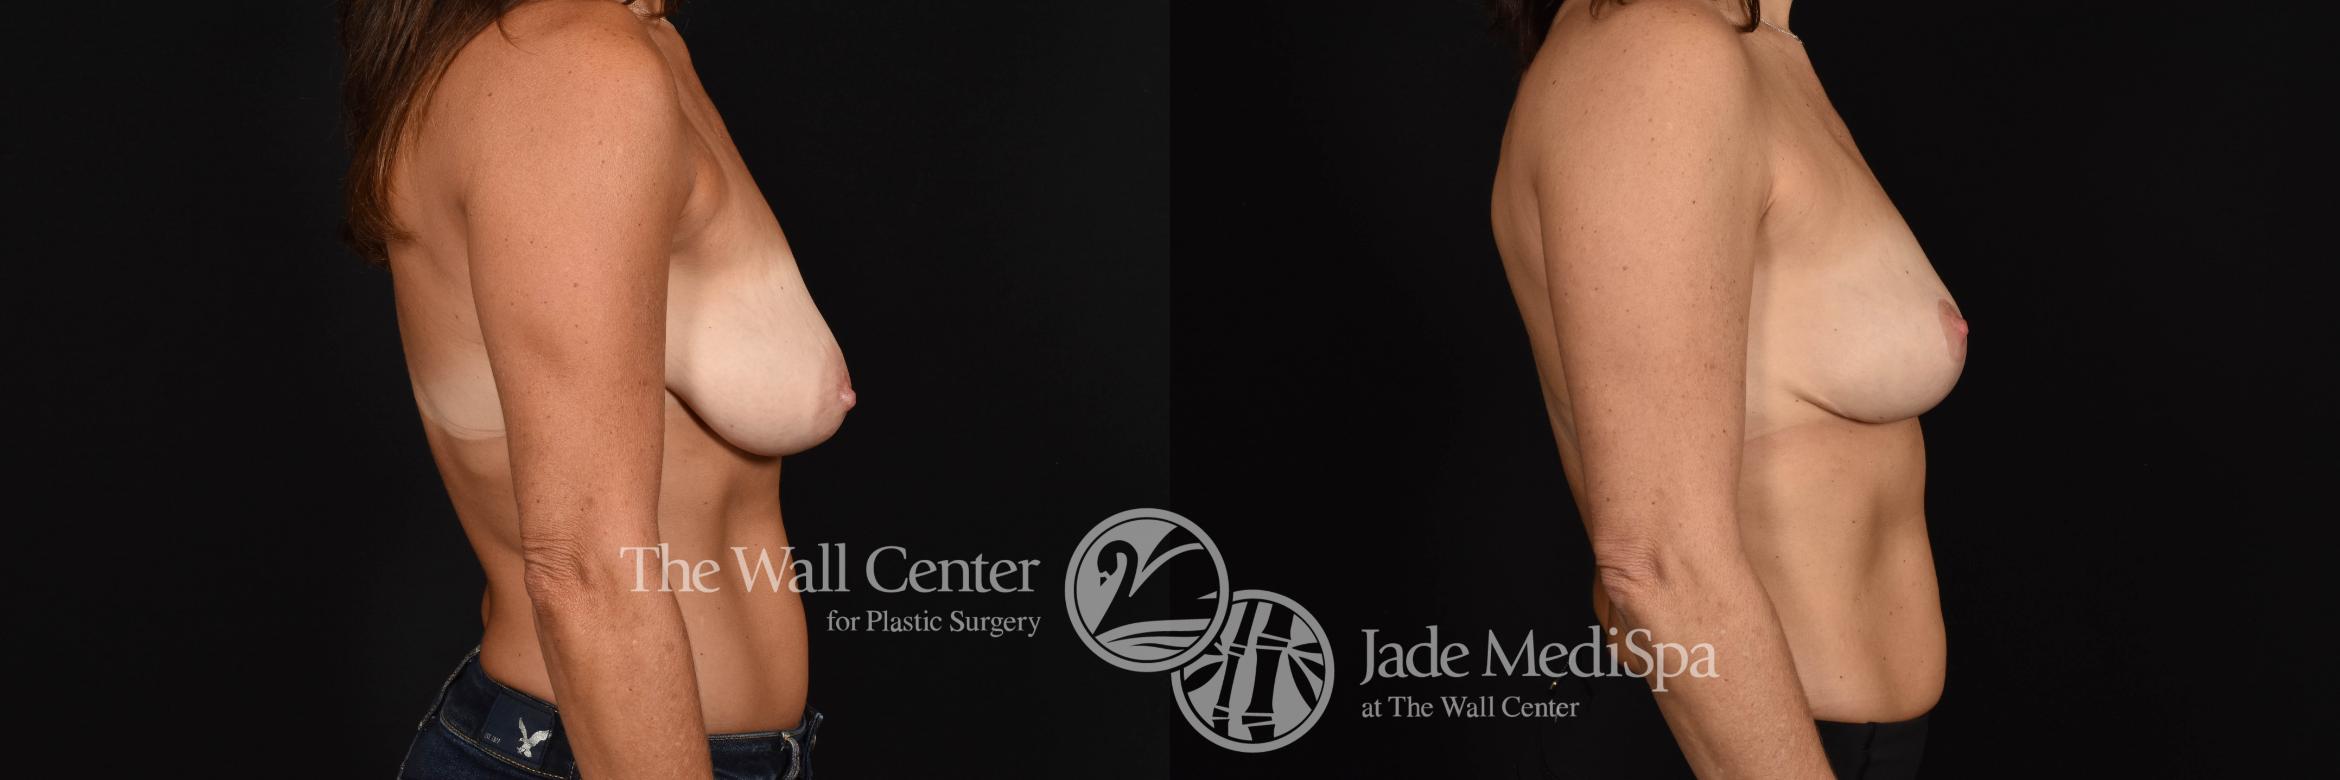 Breast Left Right Side Photo, Shreveport, Louisiana, The Wall Center for Plastic Surgery, Case 892